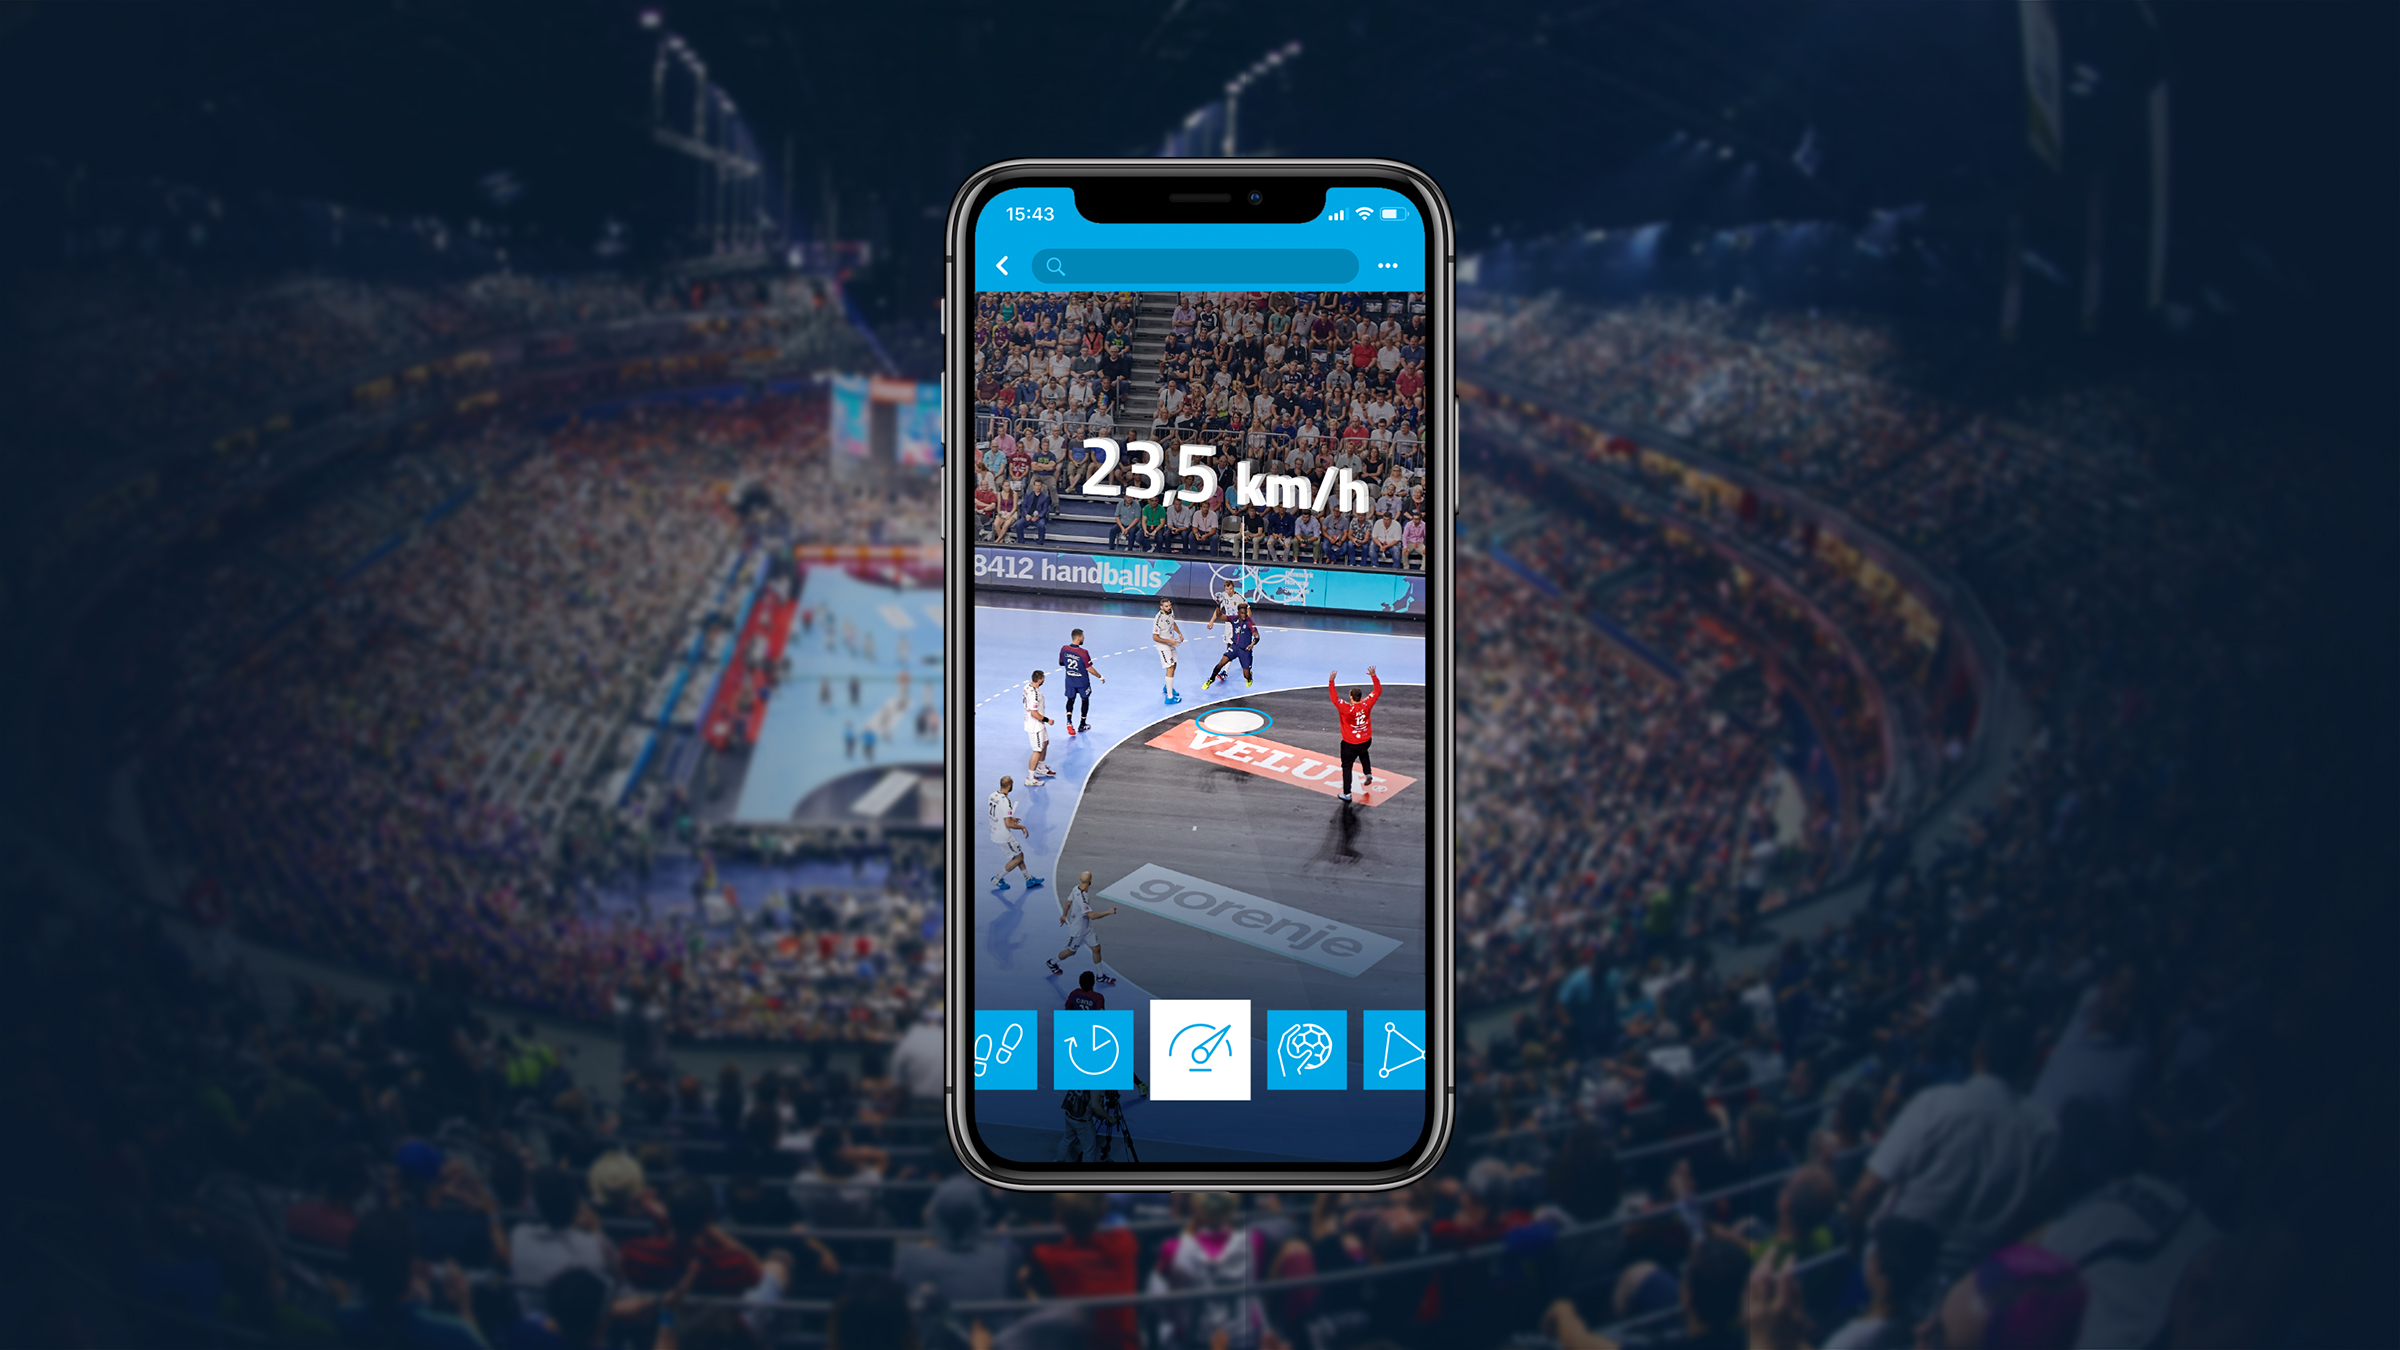 Smartphone Screen with Basketball Data from wearable sensors that collect sports analytics for team handball.